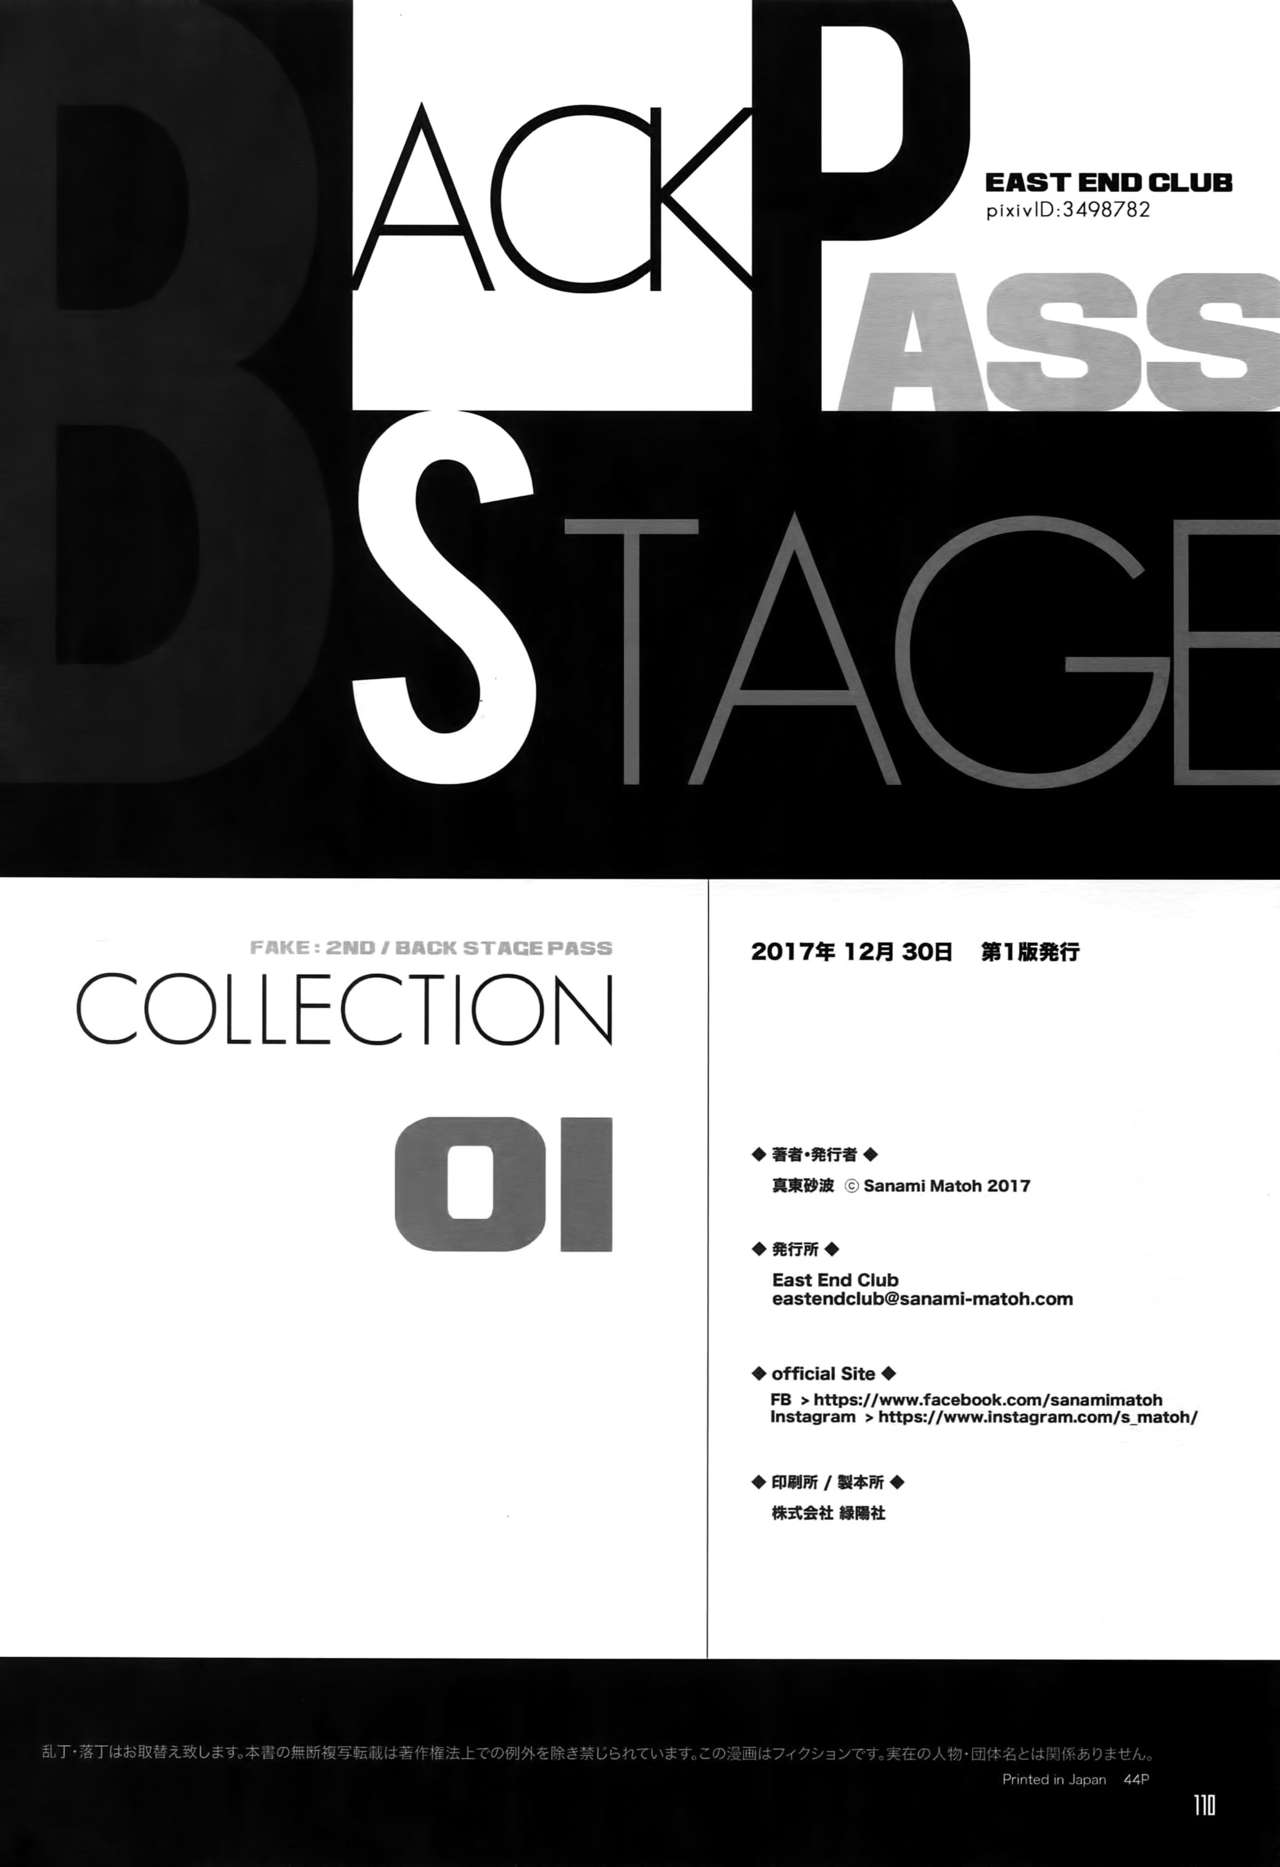 (C93) [Esst End Club (真東砂波)] FAKE:2ND/BACK STAGE PASS COLLECTION 01